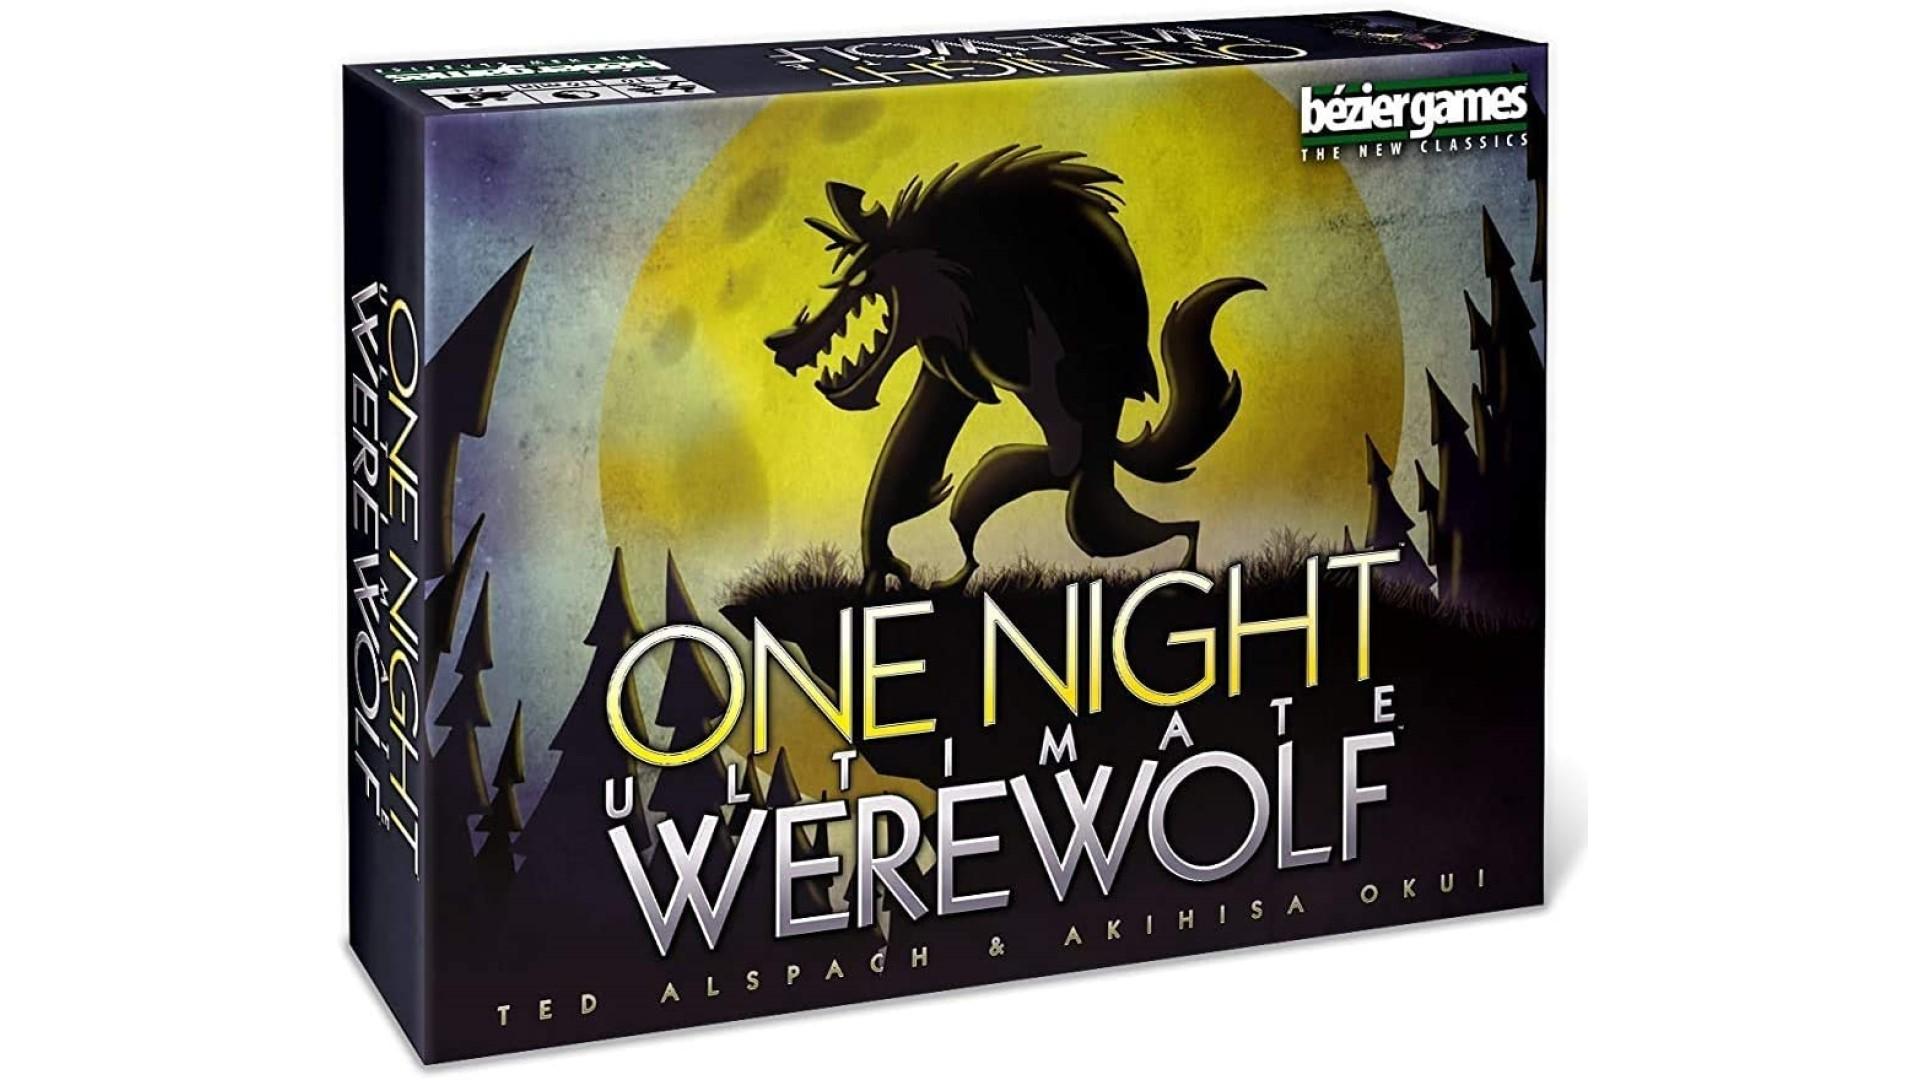 One Night Ultimate Werewolf review - game box